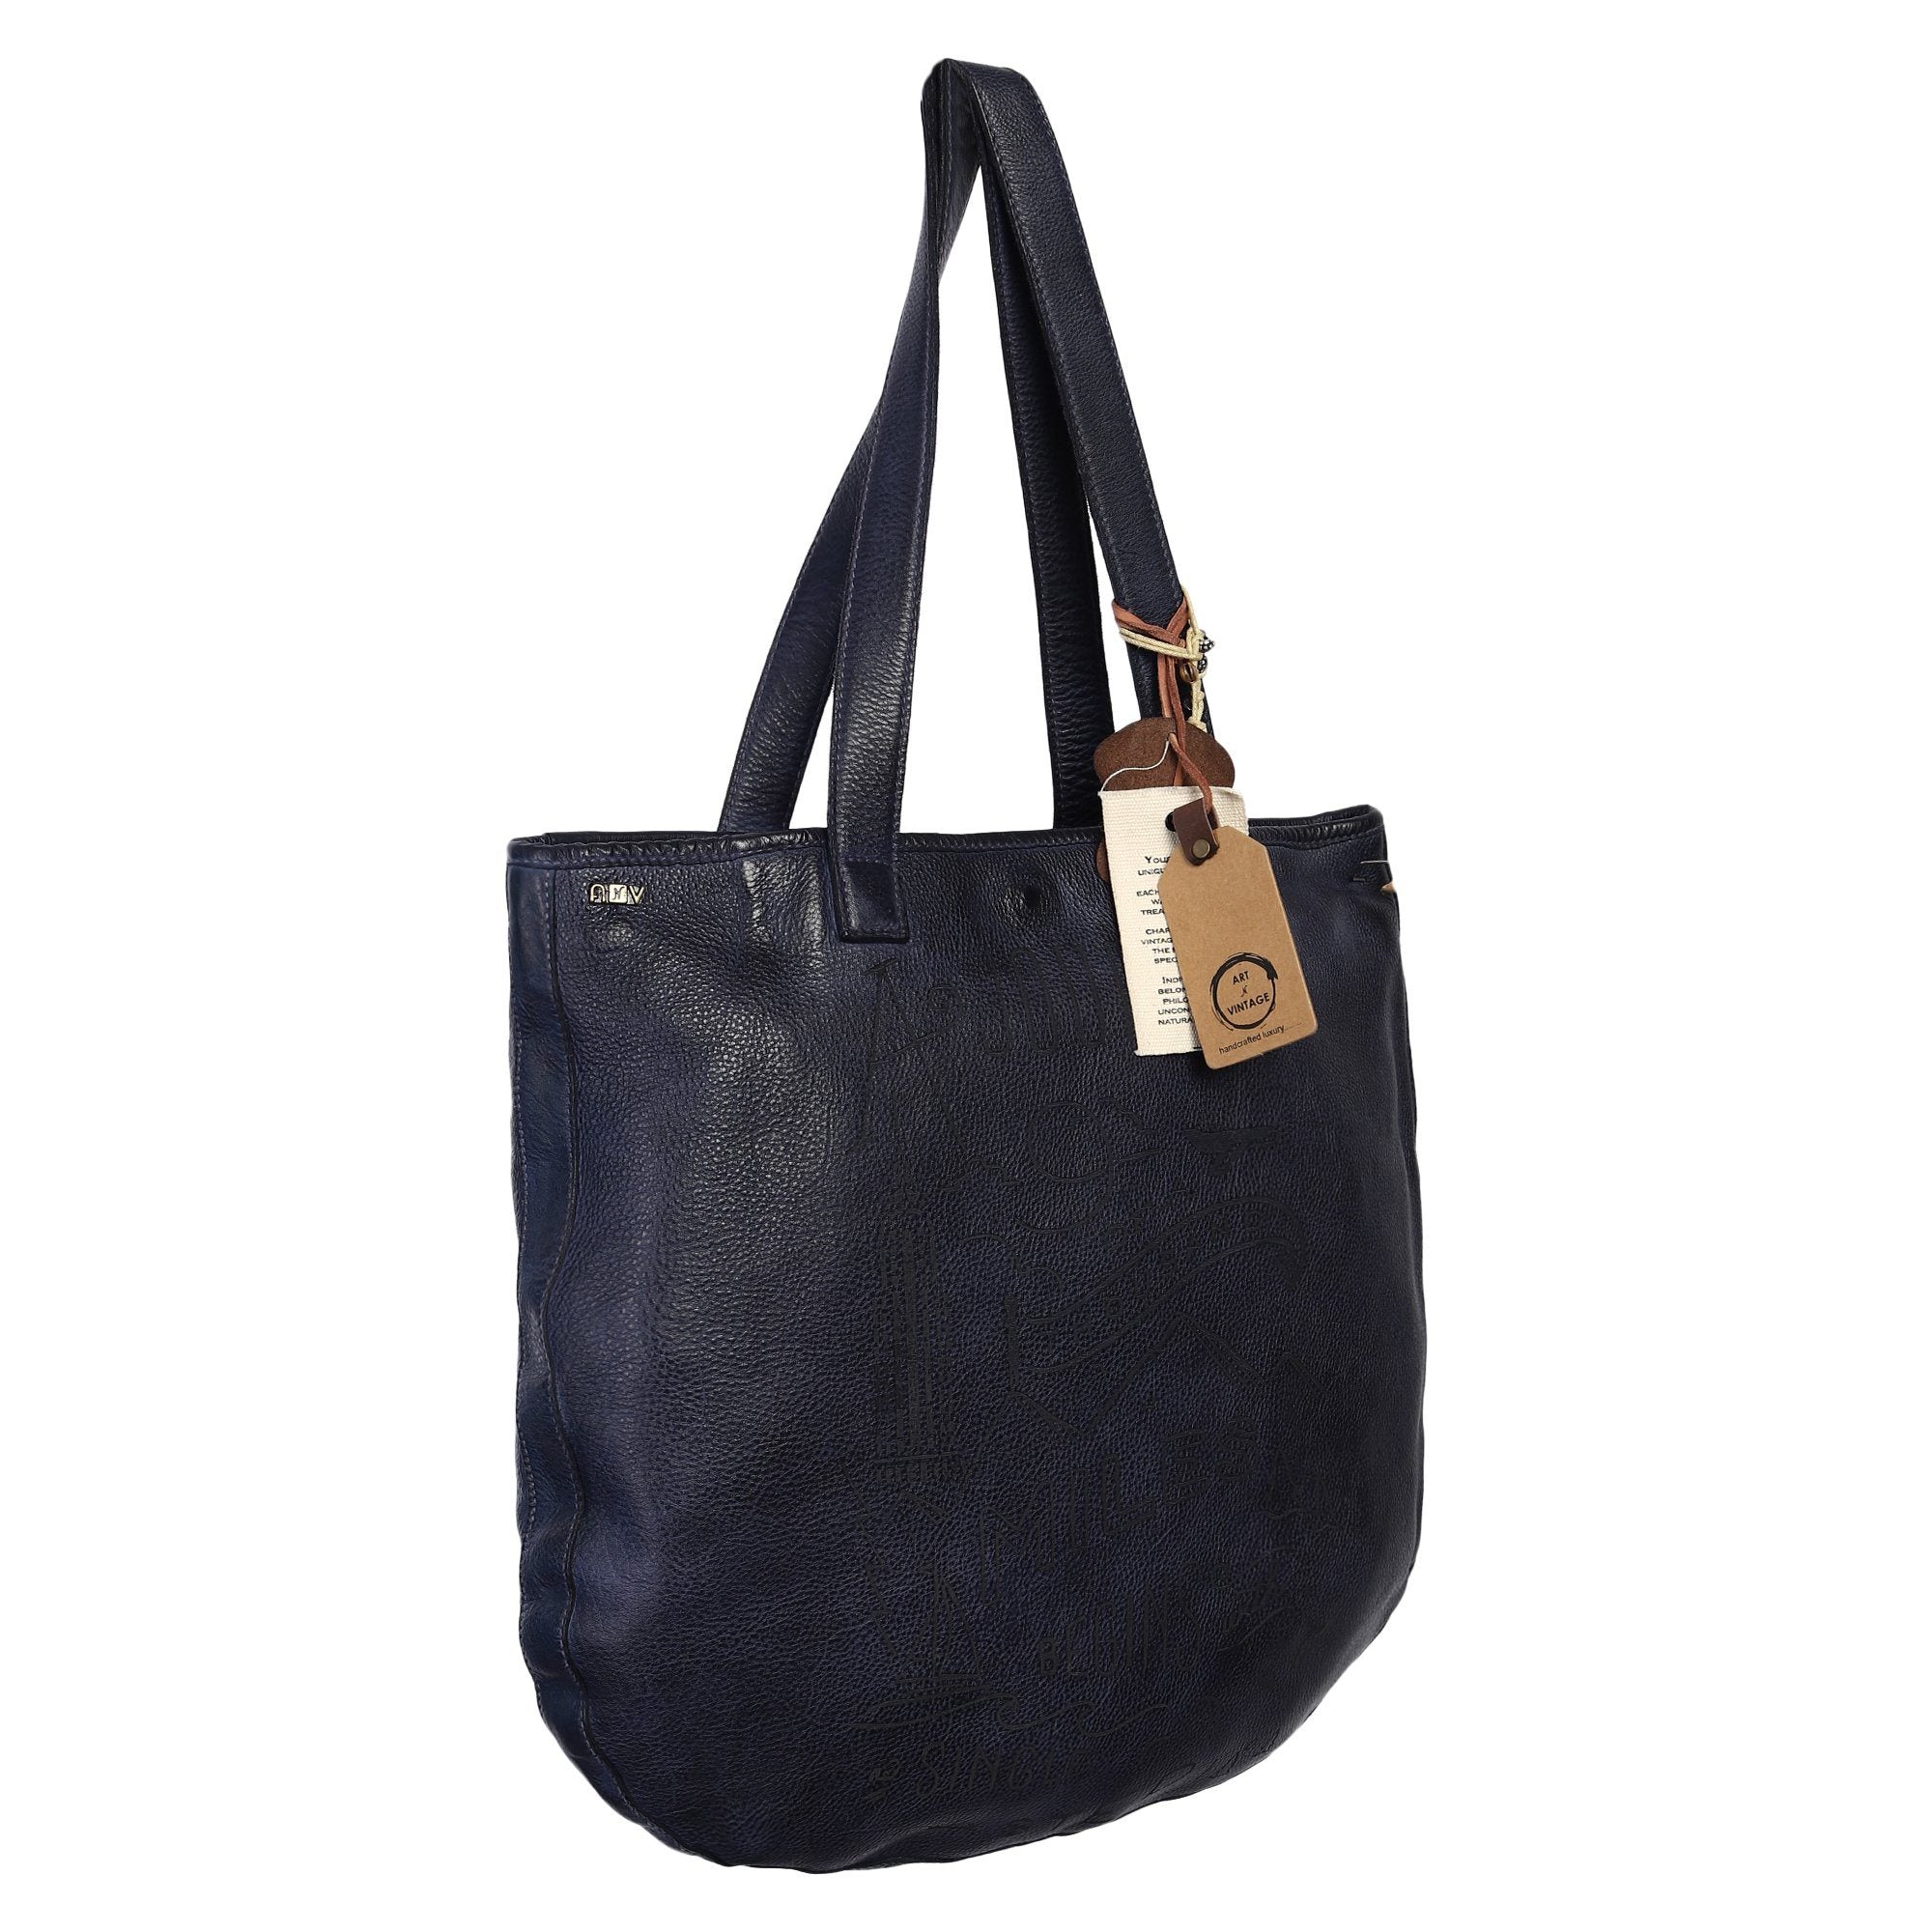 Rhoda Designer Bag: Navy blue leather shopper with lazer quote by Art N Vintage